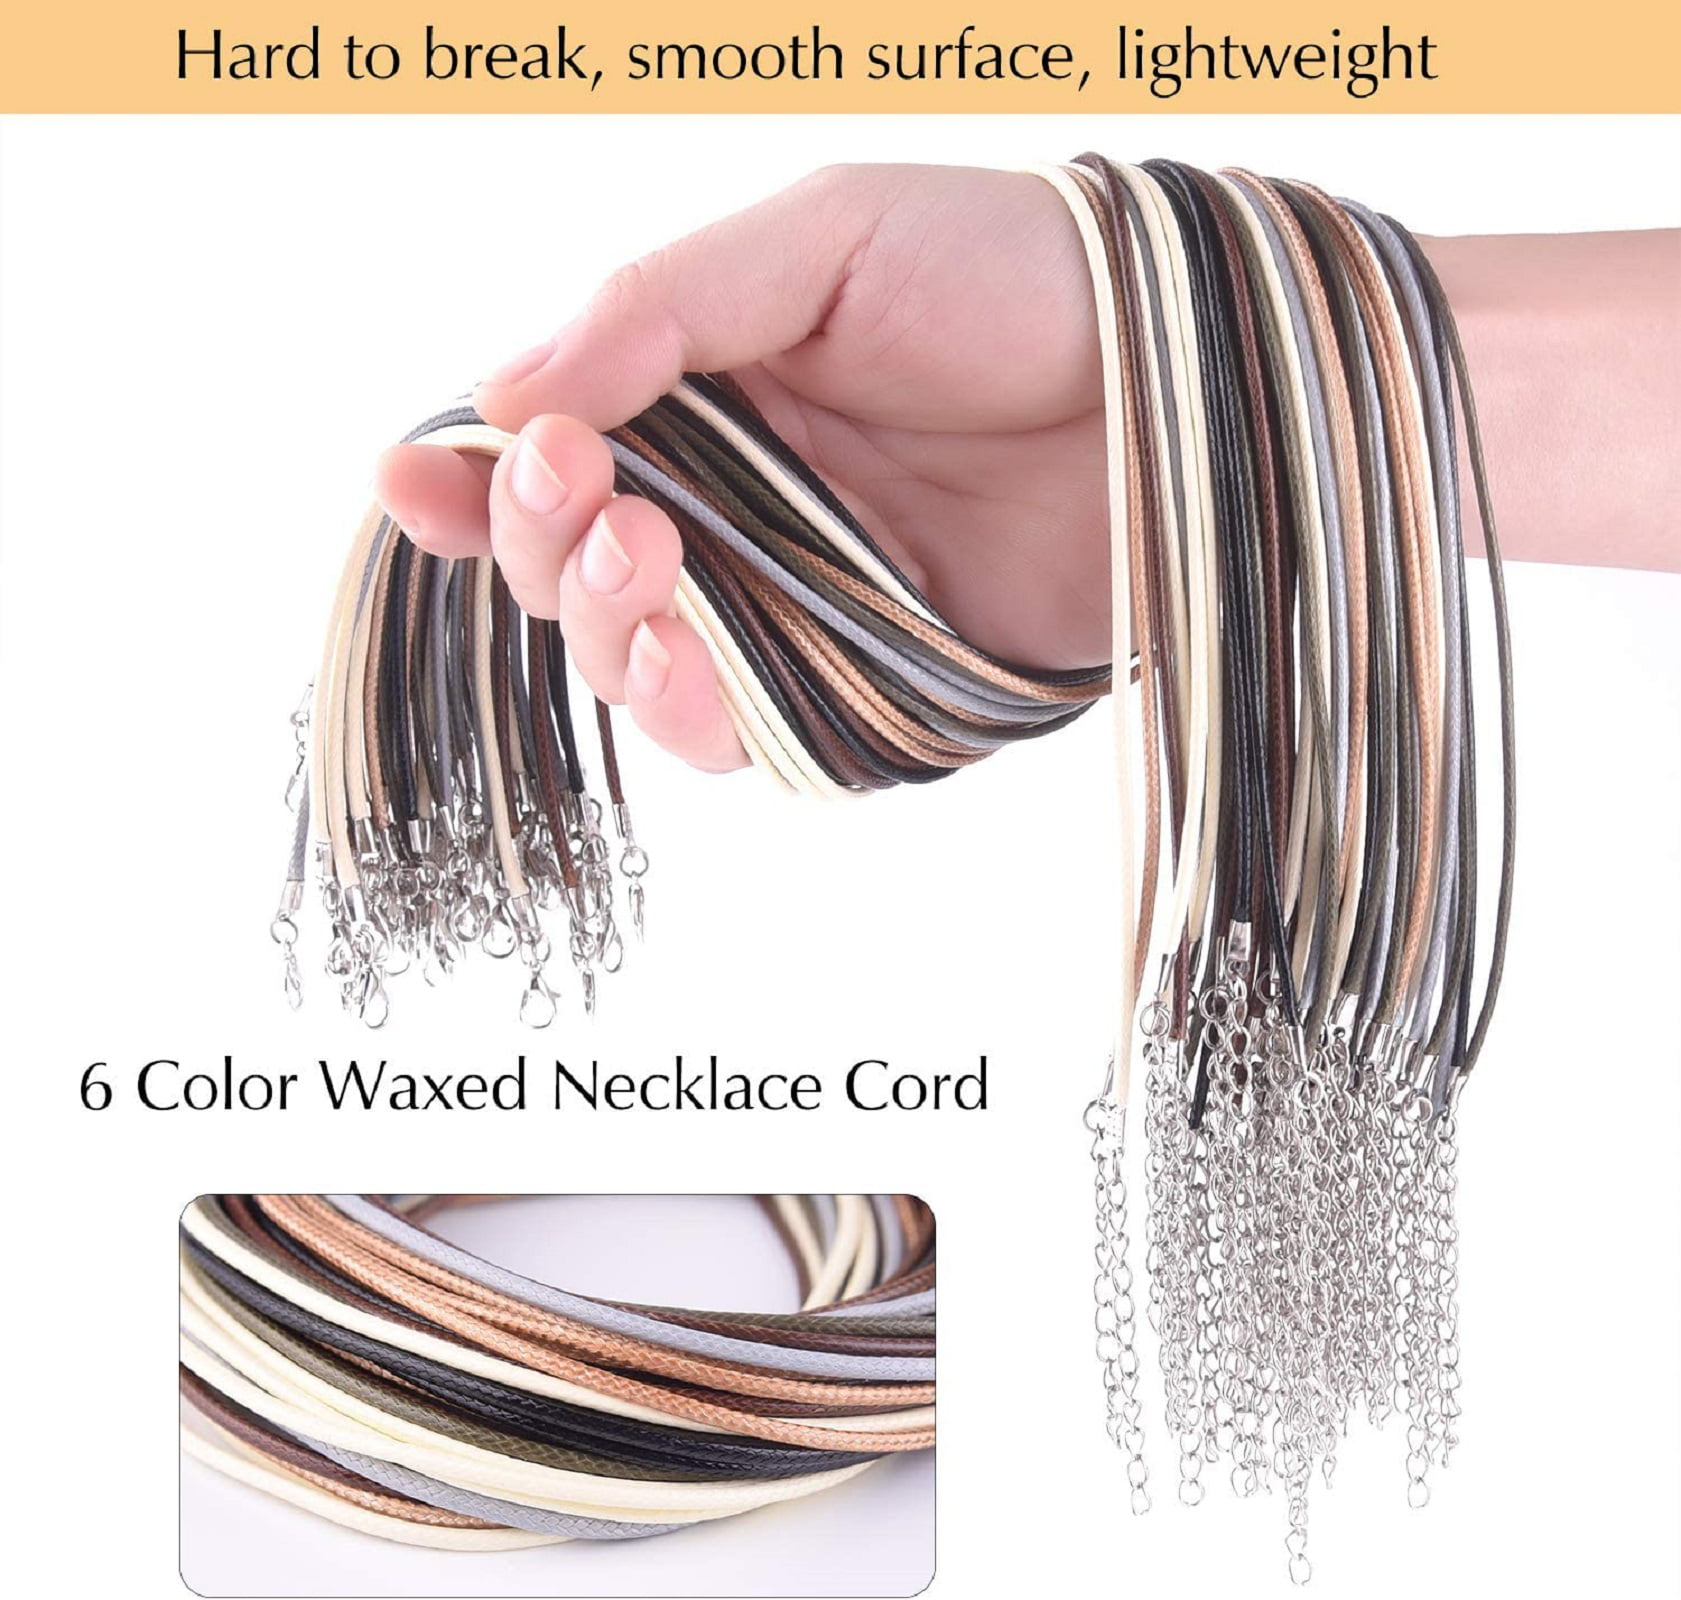 48 PCS Waxed Necklace Cord, 6 Assorted Colors Necklace Rope